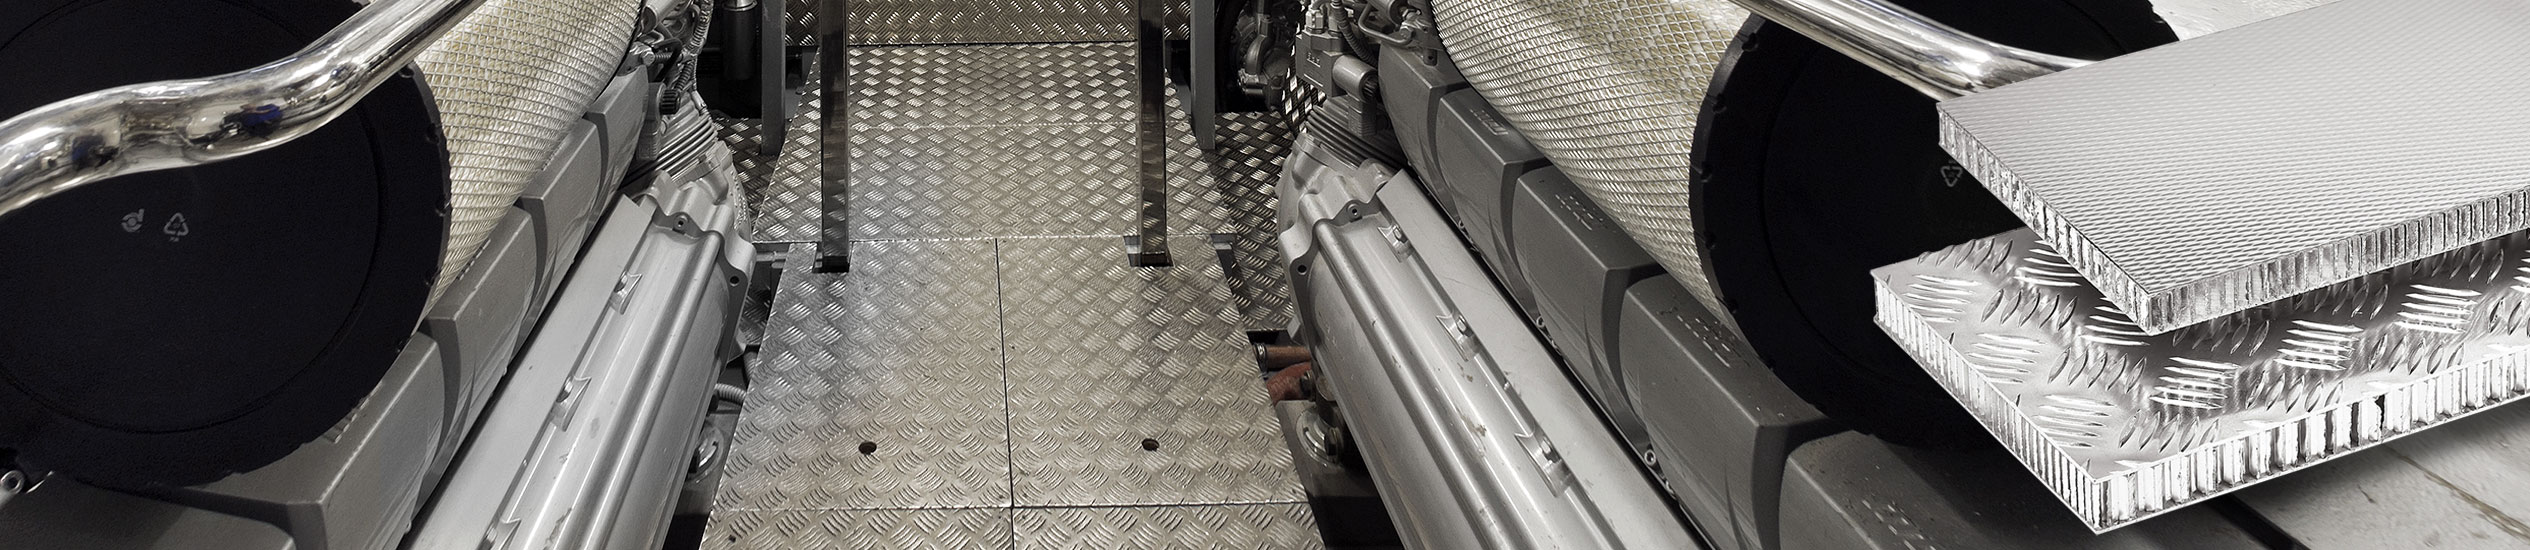 Technical floors for engine rooms or rigid floating floors that can be perfectly walked on like normal floors. Customizable as only CEL can do